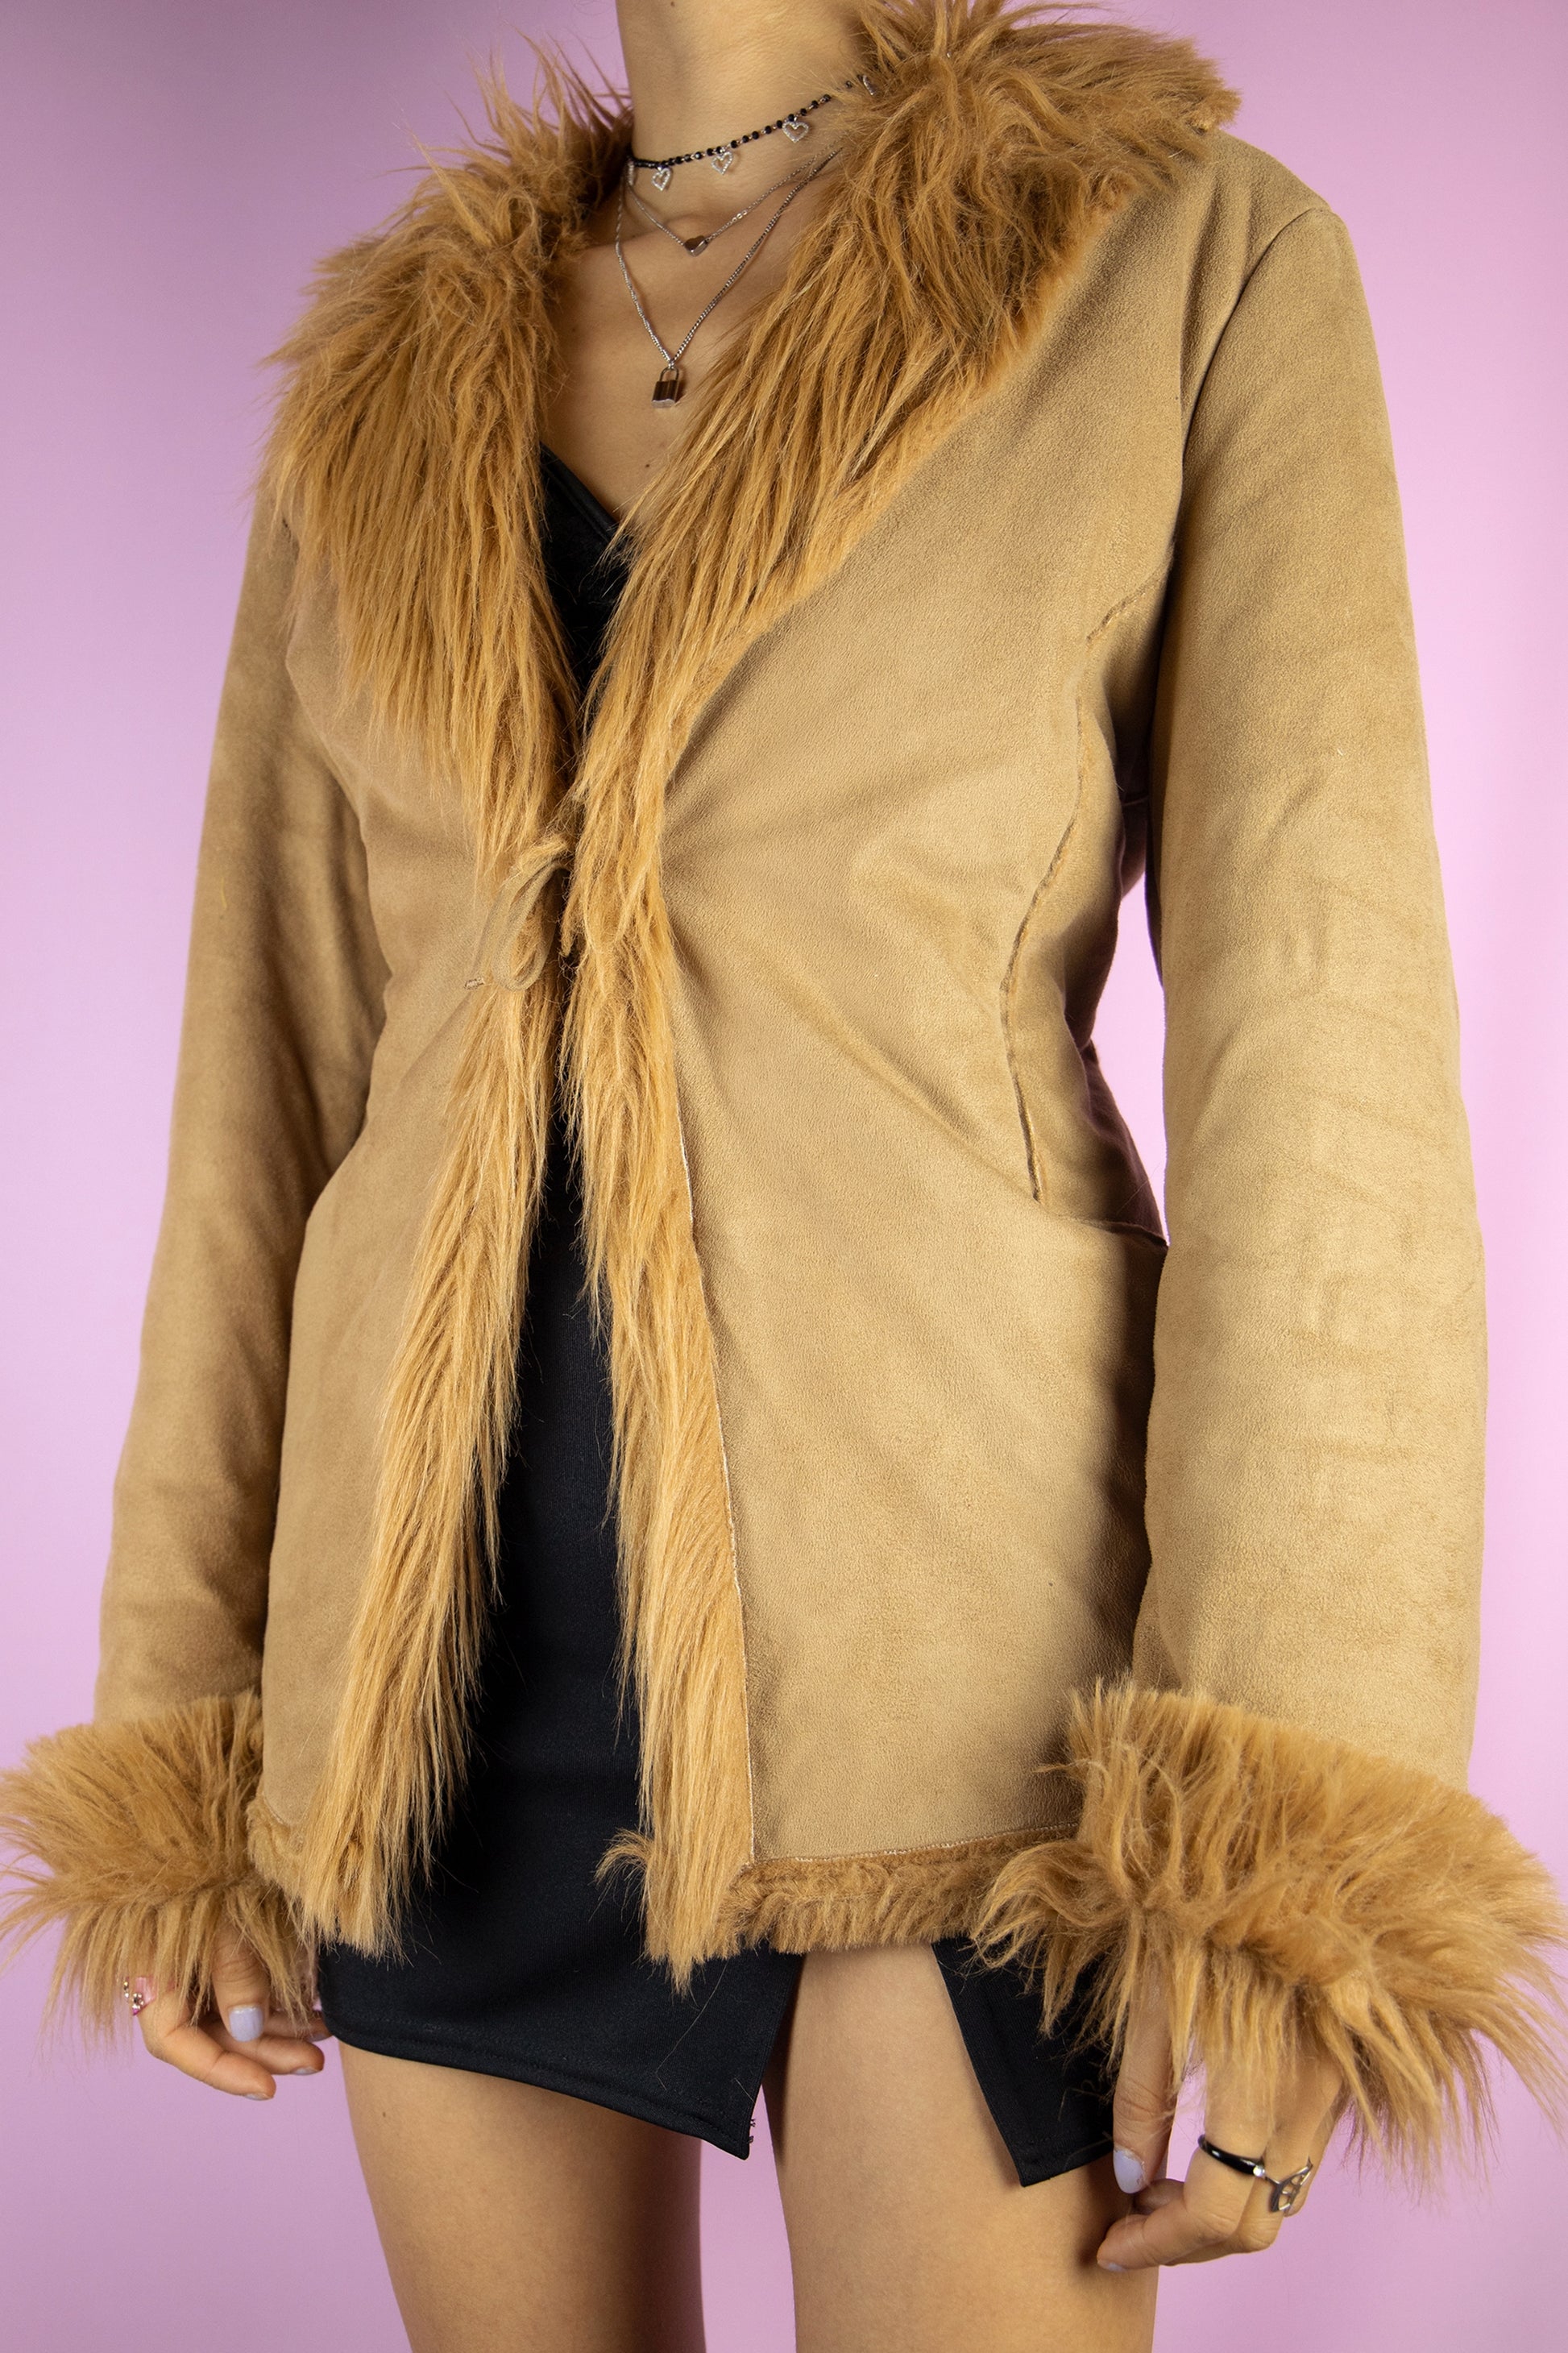 The Y2K Penny Lane Style Jacket is a vintage brown jacket with faux fur lining, collar and cuffs, it also has pockets and ties in the front. Iconic afghan style 2000s winter statement coat.